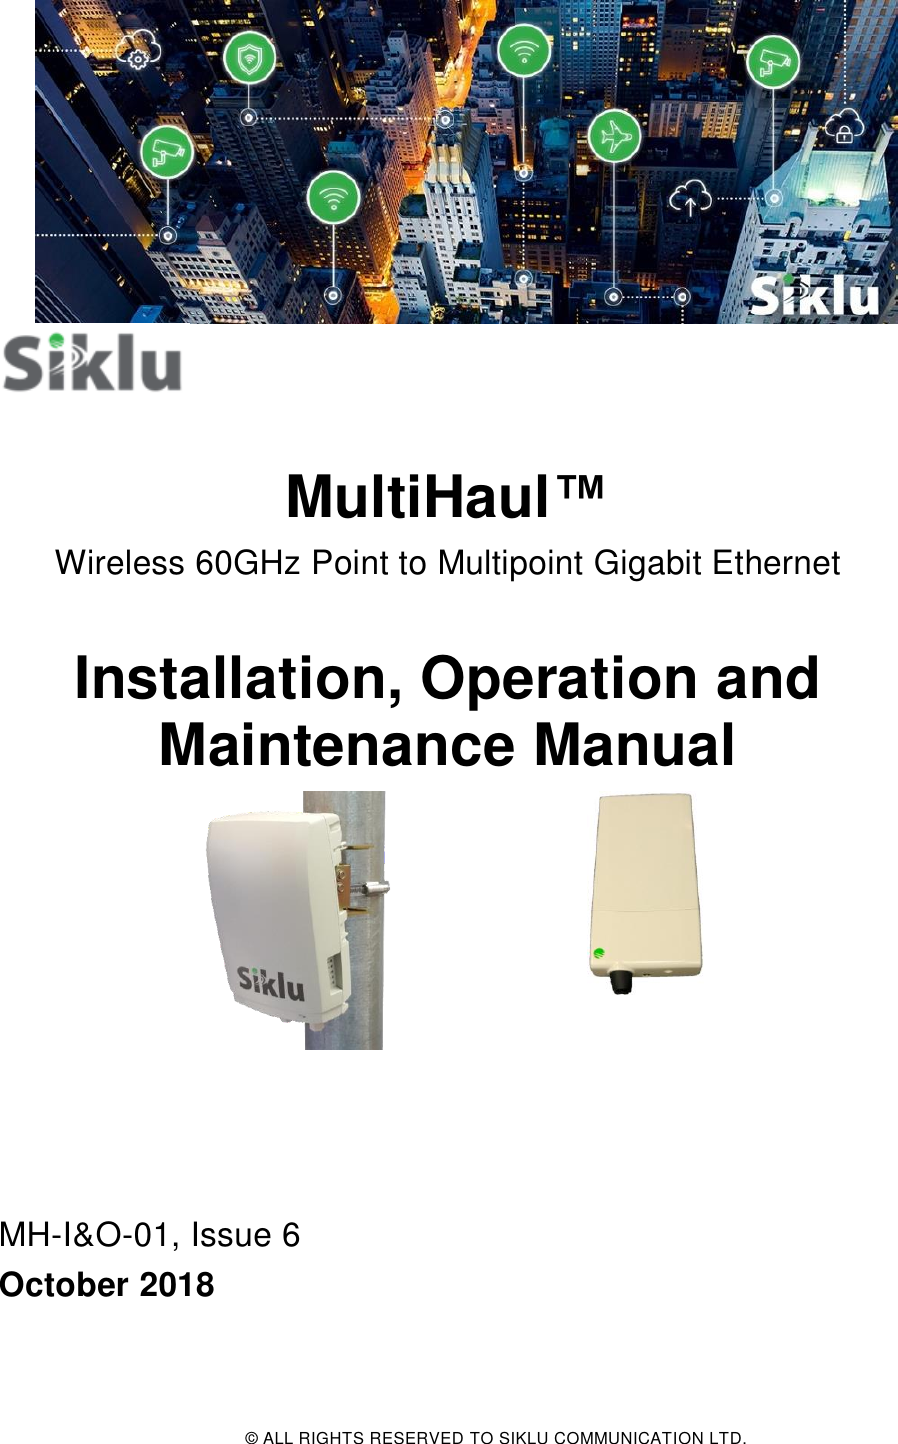  © ALL RIGHTS RESERVED TO SIKLU COMMUNICATION LTD.    MultiHaul™ Wireless 60GHz Point to Multipoint Gigabit Ethernet  Installation, Operation and Maintenance Manual      MH-I&amp;O-01, Issue 6 October 2018  